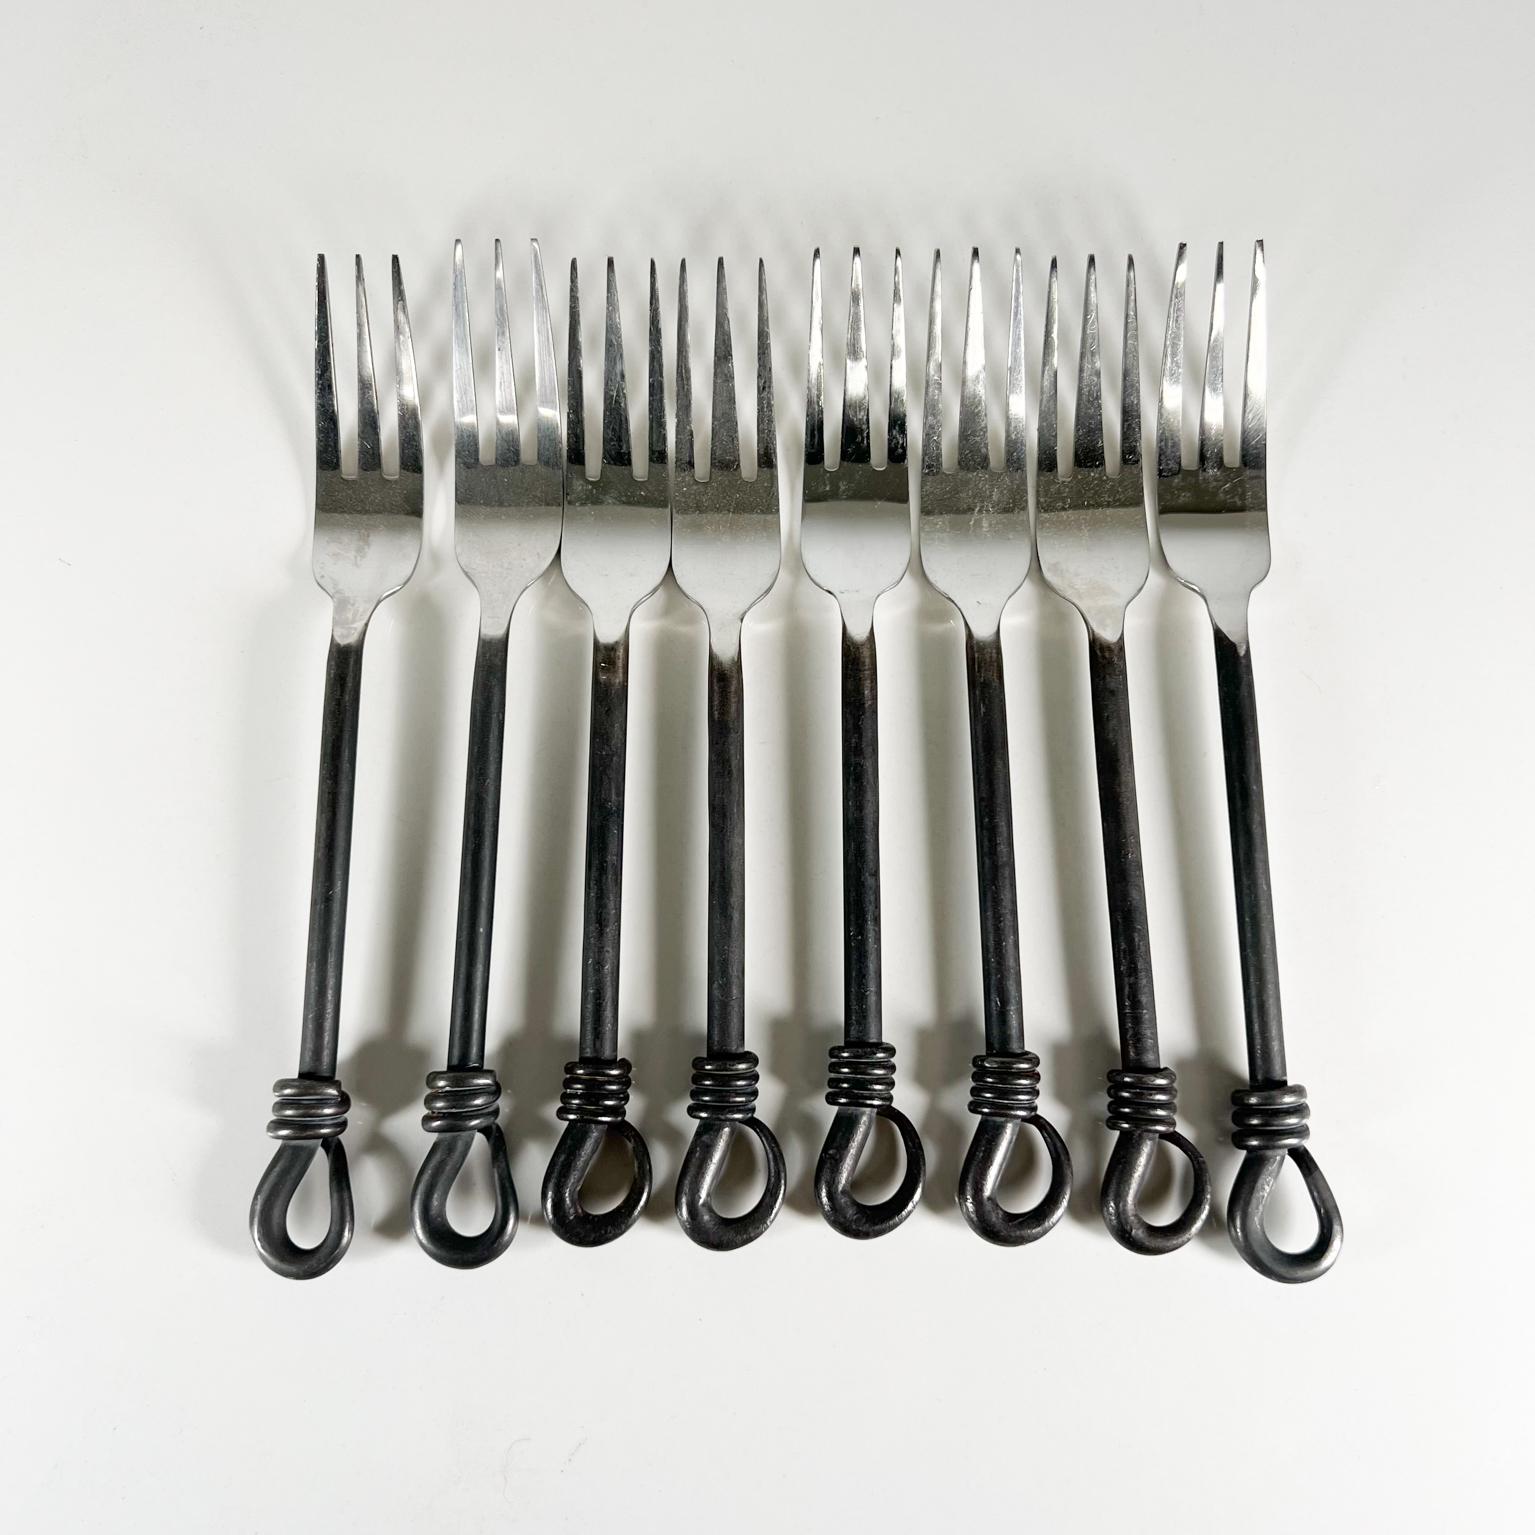 Modern Design Gourmet settings Twist dinner Forks set of eight
18/10 stainless steel
Stamped by maker.
Preowned used vintage condition
Refer to images.
Measures: 8.13 long x 1 width x .88 height.